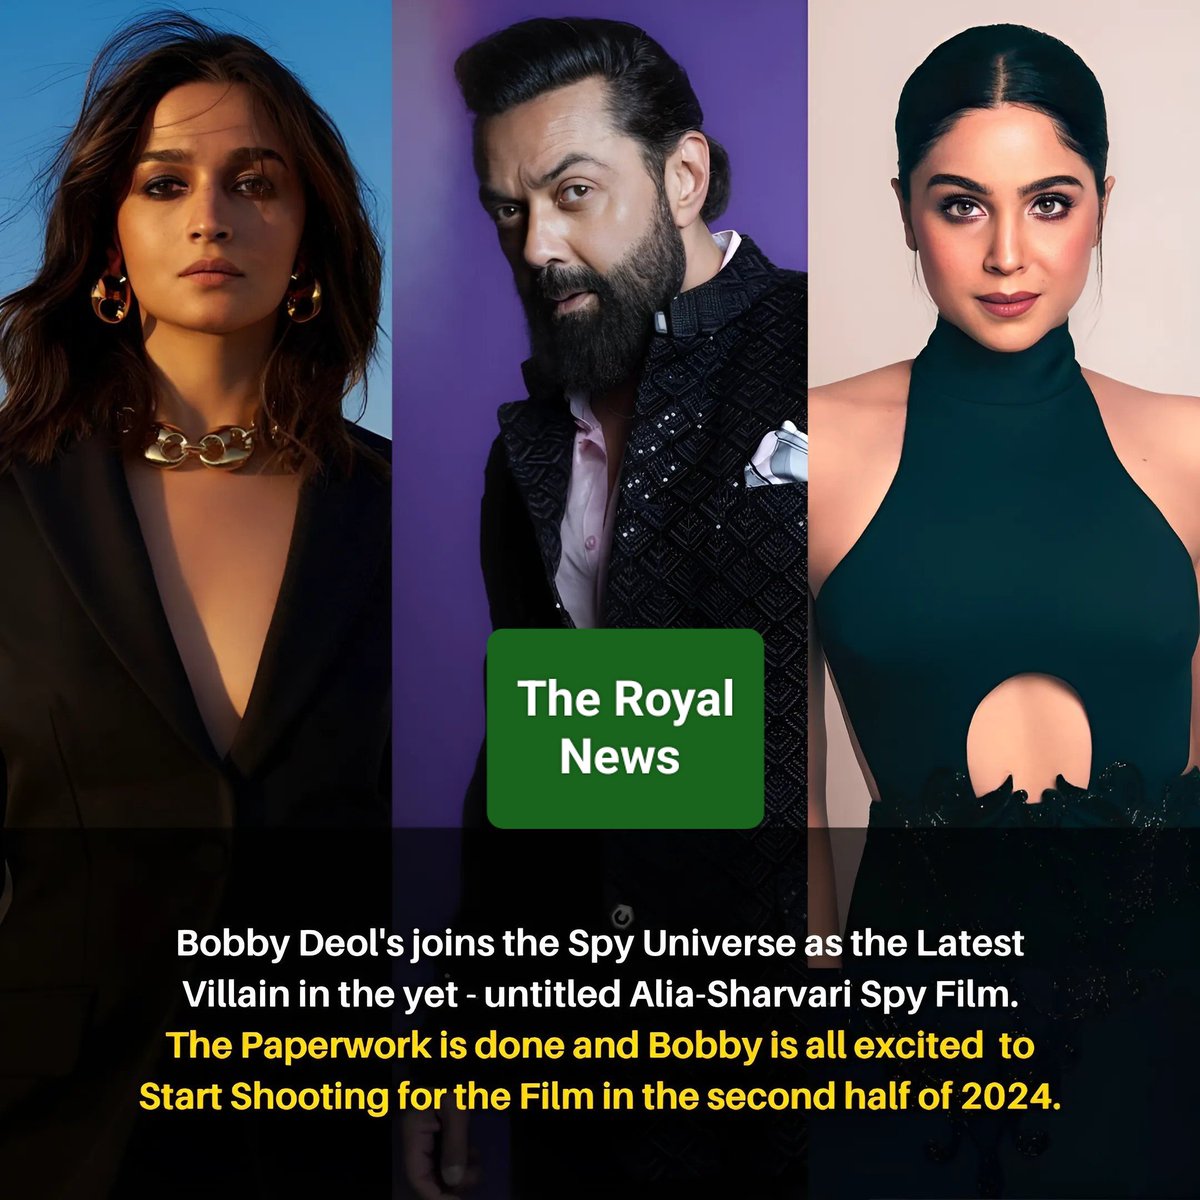 #BobbyDeol's joins the #SpyUniverse as the Latest Villain in the yet - untitled #Alia-#Sharvari Spy Film. The Paperwork is done and #Bobby is all excited to Start Shooting for the Film in the second half of 2024.

#AliaBhatt #SharvariWagh #YRFSpyUniverse #Suryacinefinite #kbke